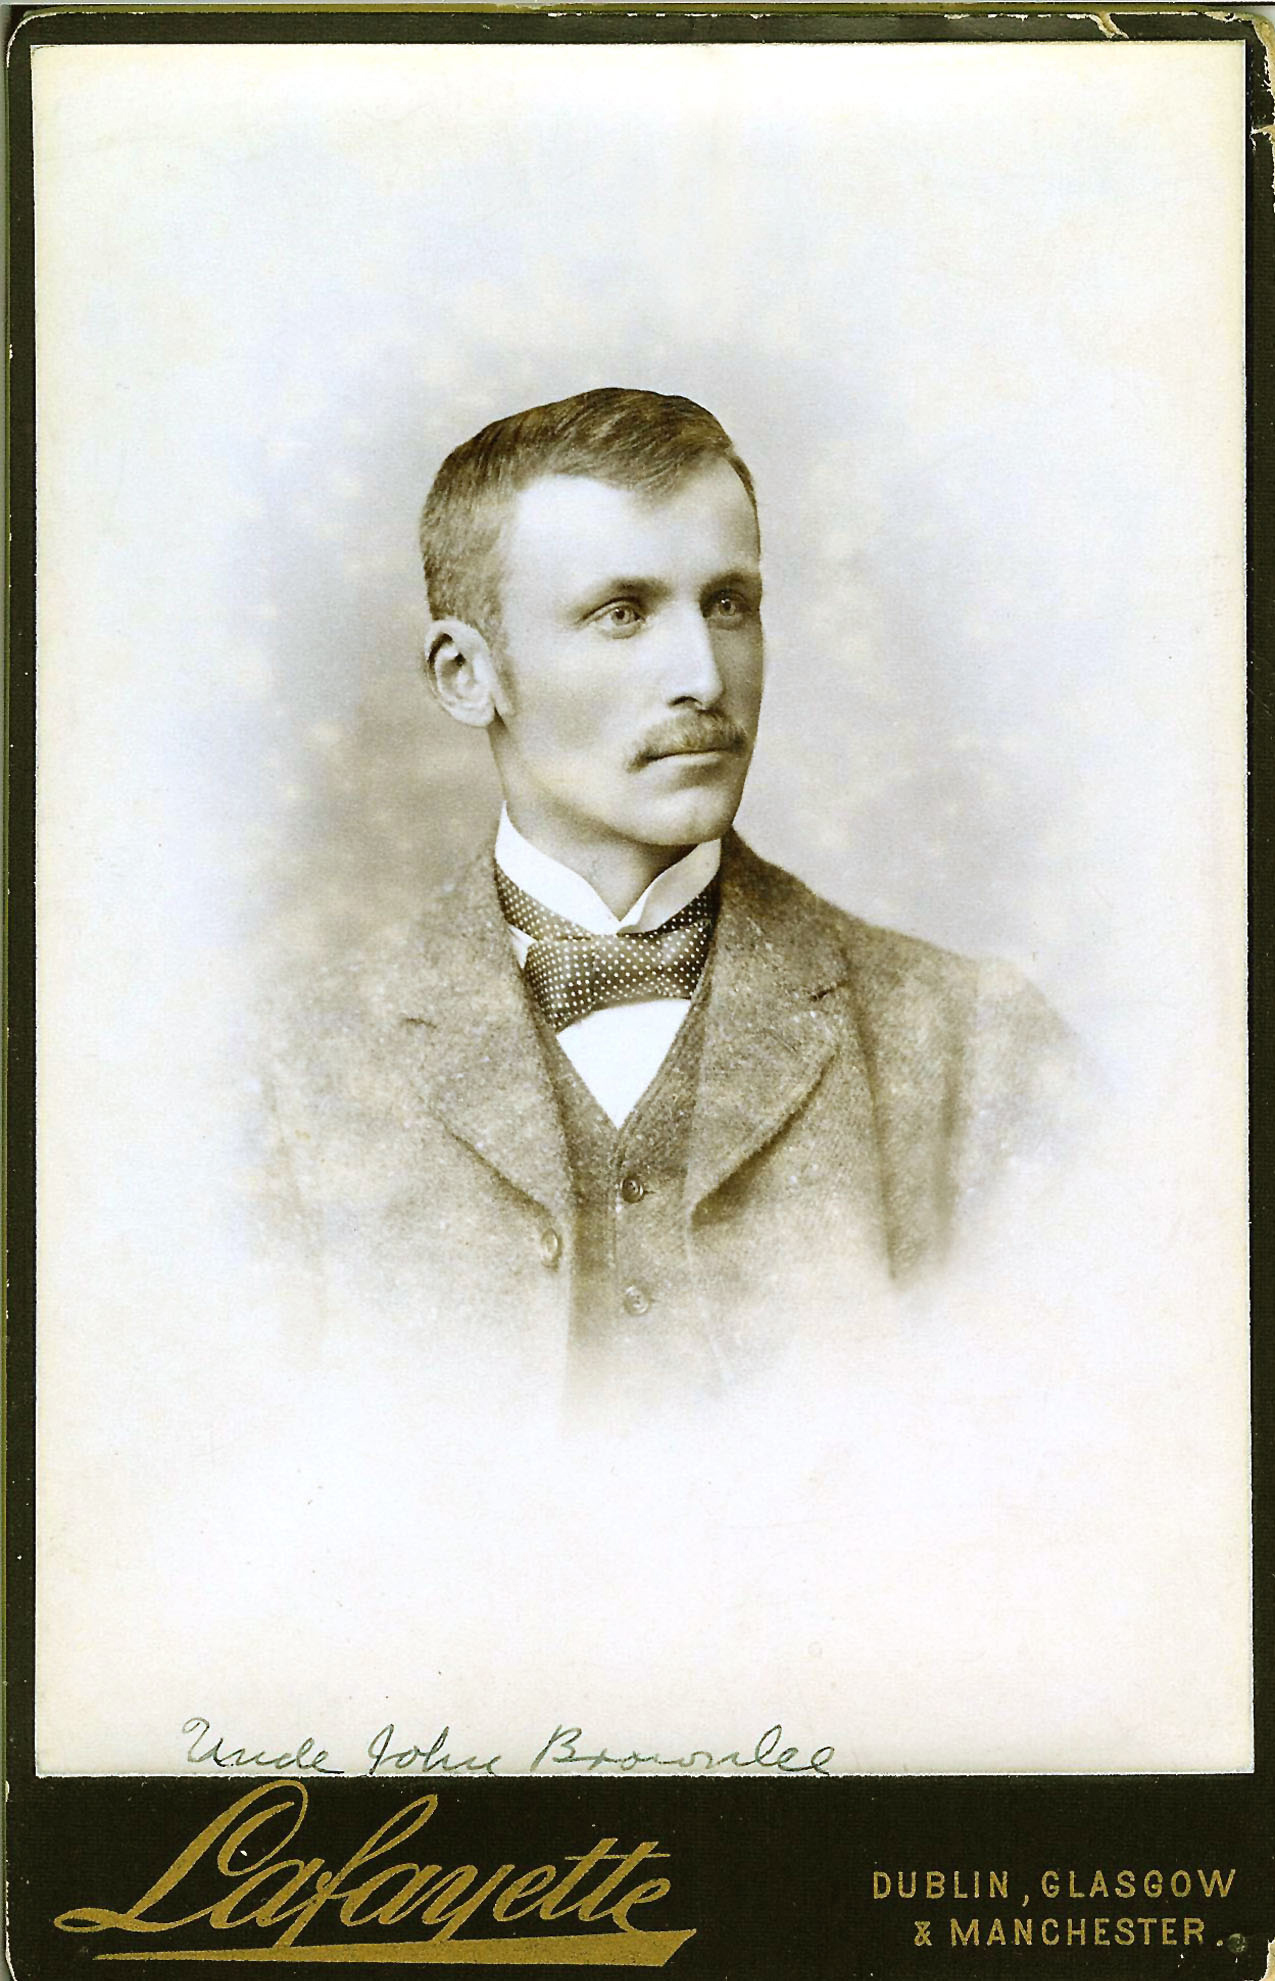 Photo of John Brownlee as a young man.